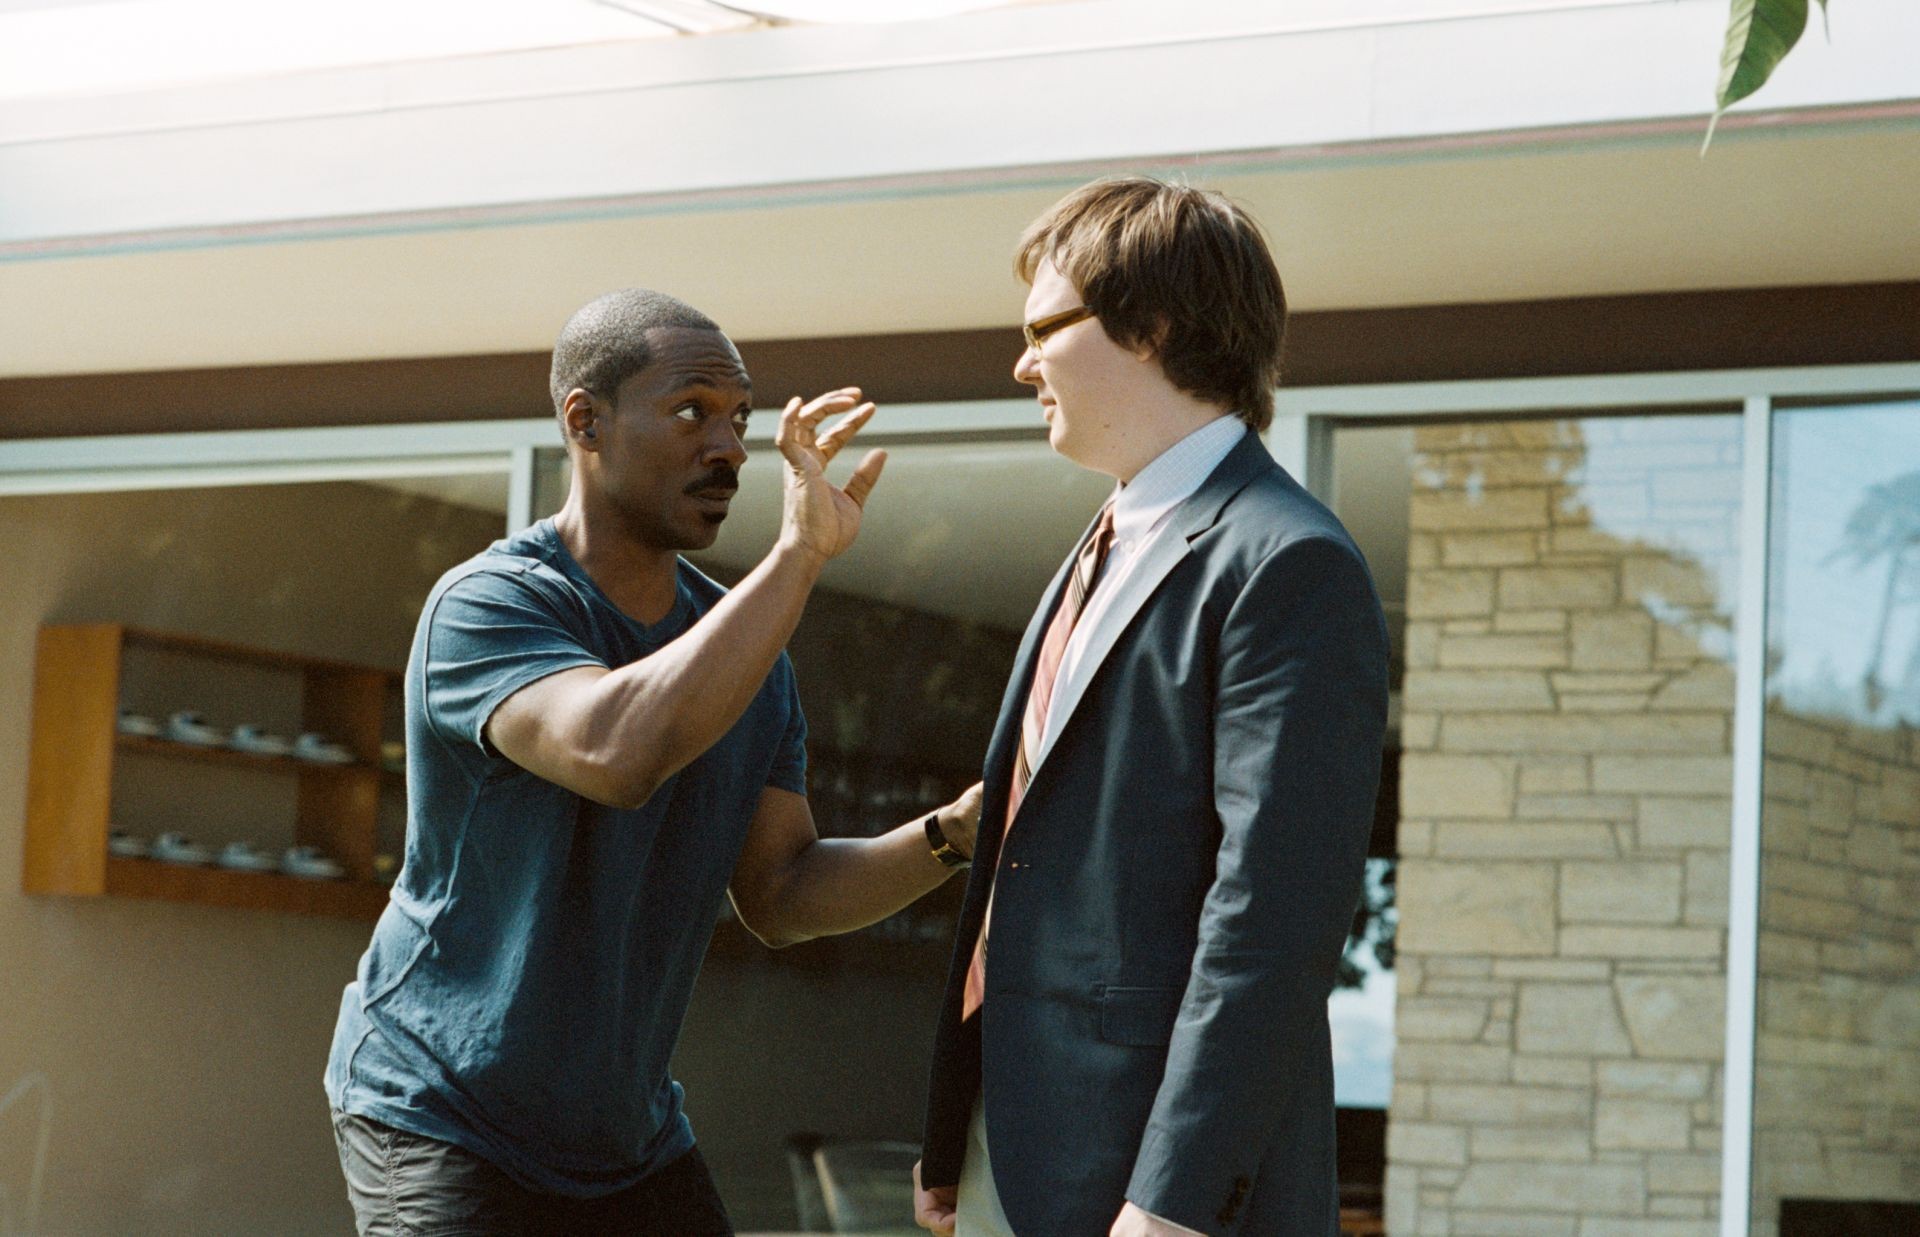 Eddie Murphy stars as Jack McCall and Clark Duke stars as Aaron Wiseberger in DreamWorks SKG's A Thousand Words (2012). Photo credit by Bruce McBroom.